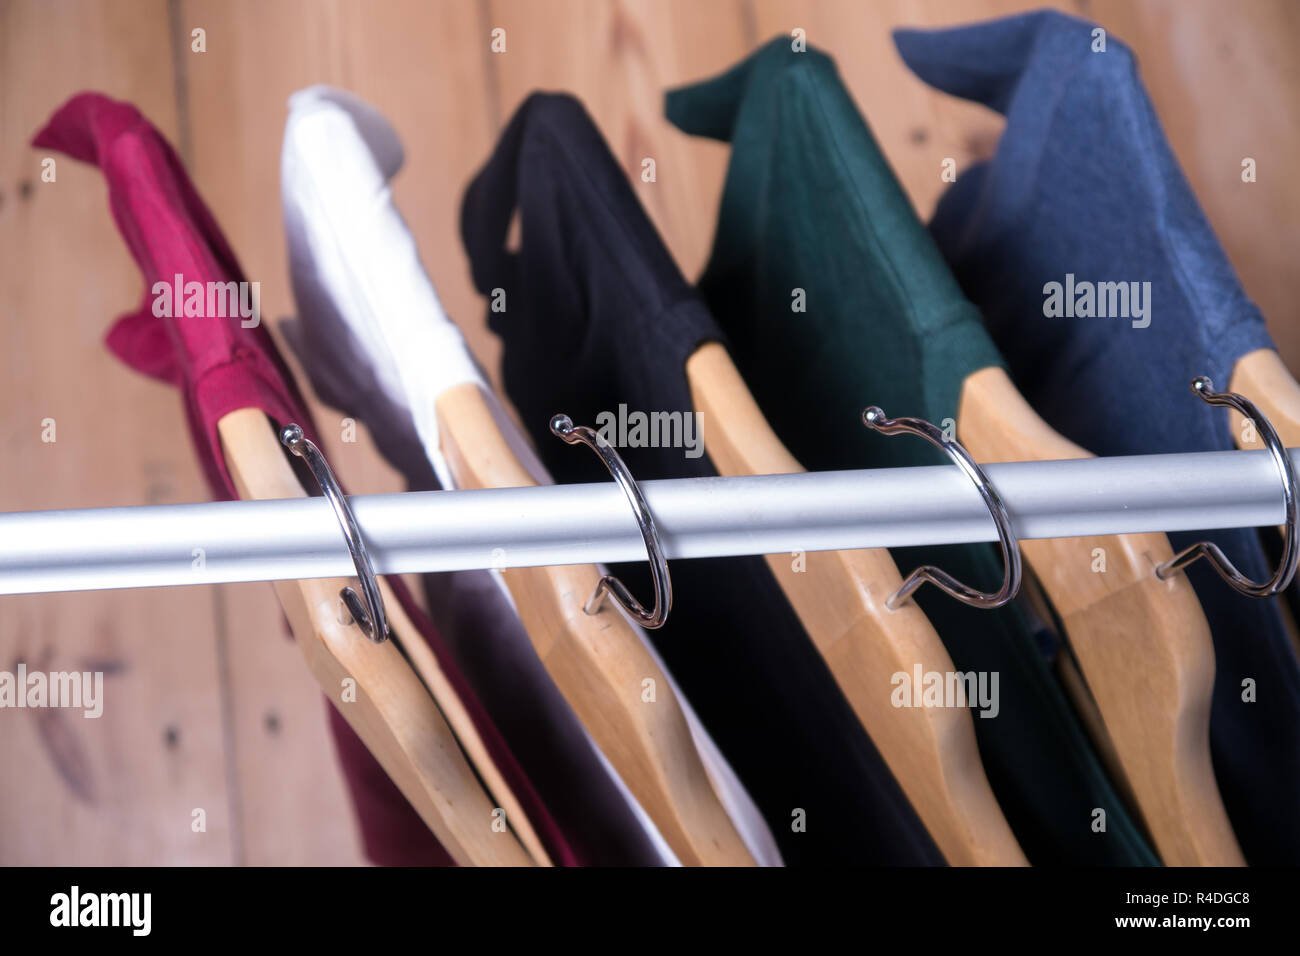 hangers with t-shirts Stock Photo - Alamy